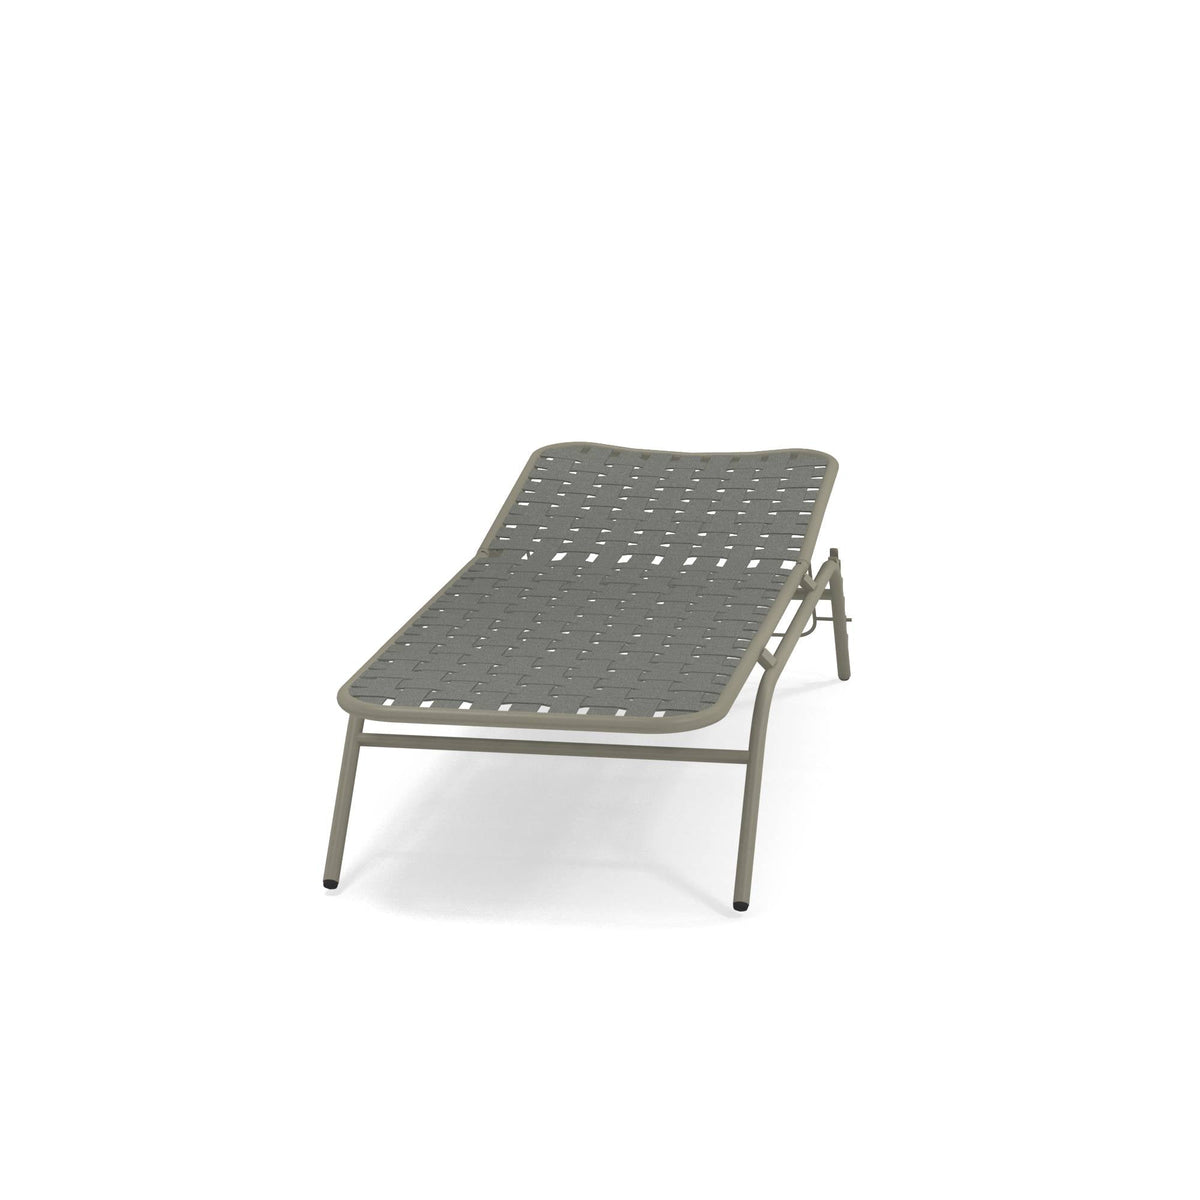 Yard 504 Lounger-Emu-Contract Furniture Store